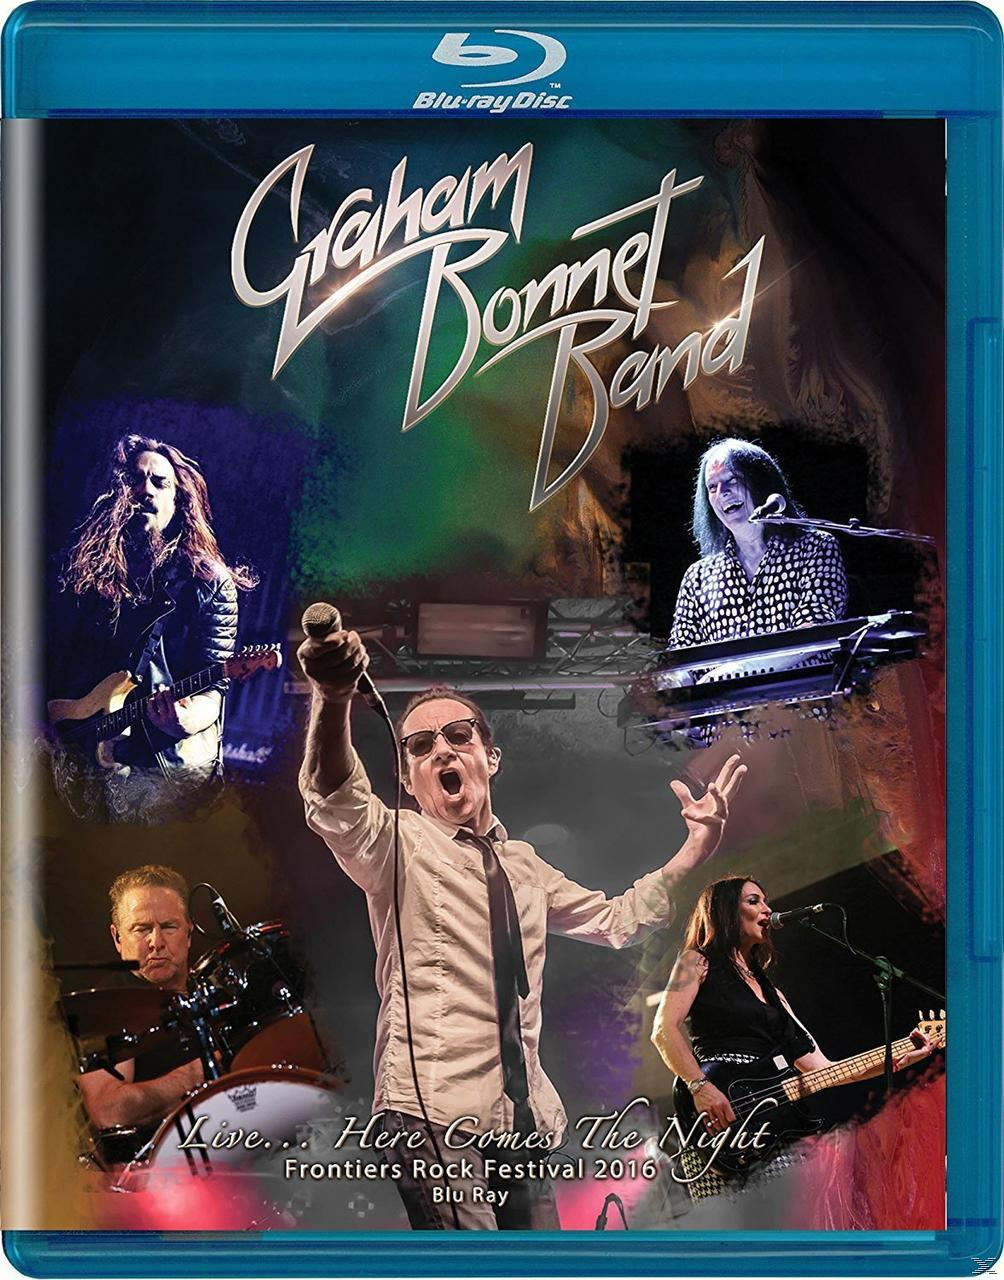 Graham (Blu-ray) - Band Comes Night Bonnet Live...Here The -